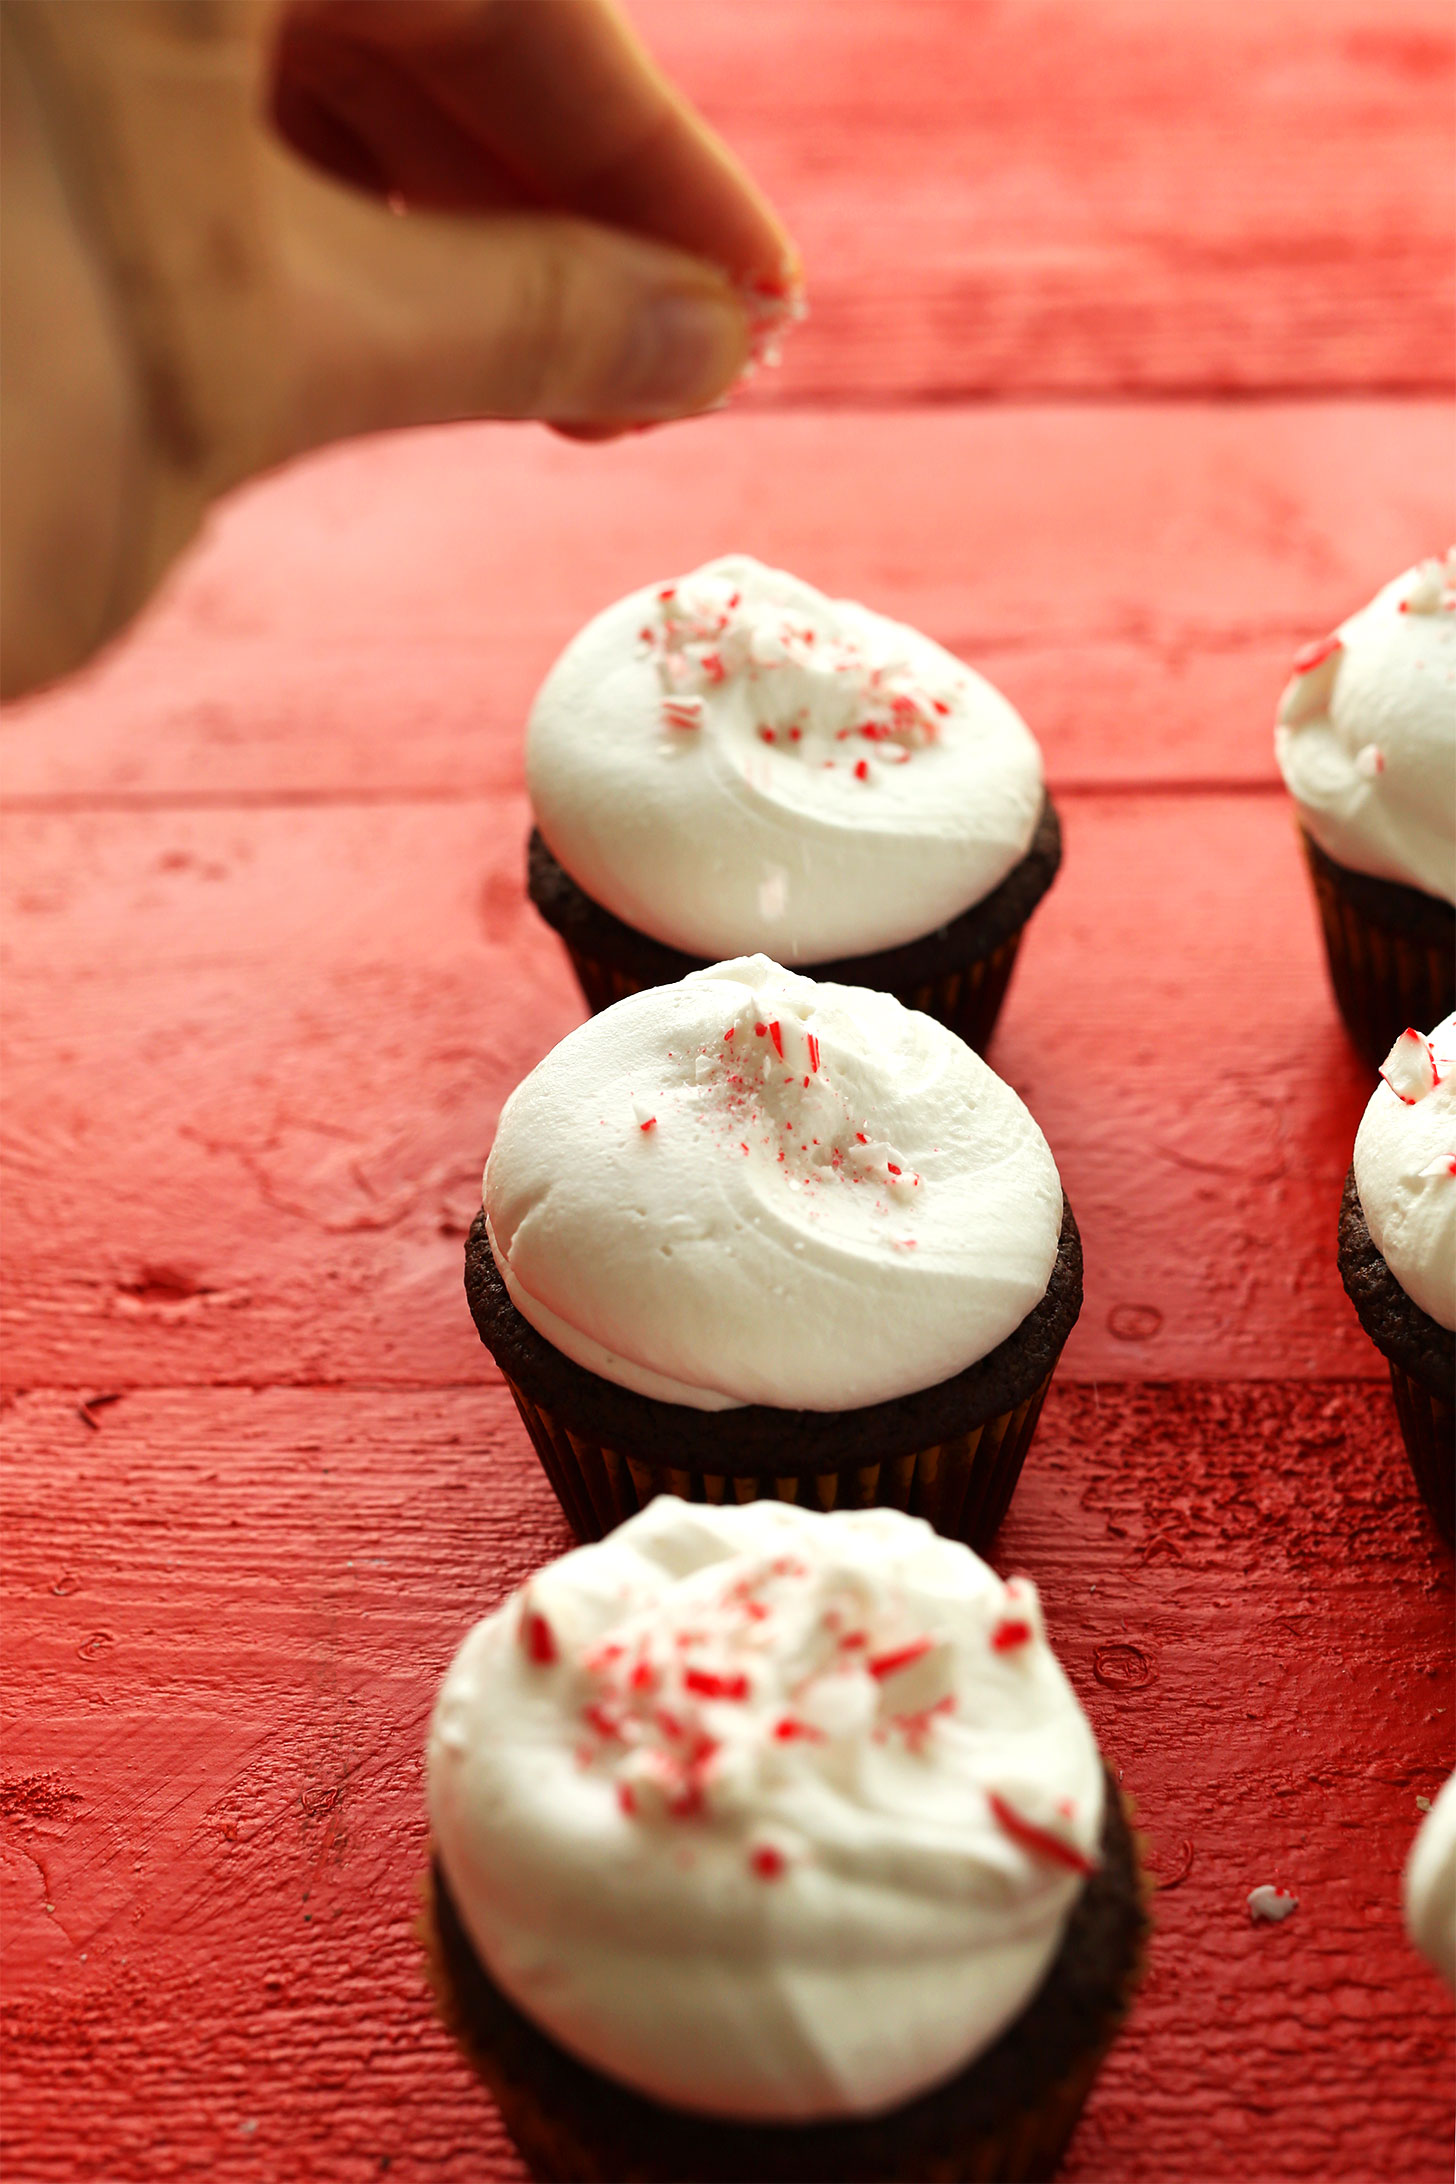 Sprinkling crushed candy cane onto cupcakes for a festive holiday dessert